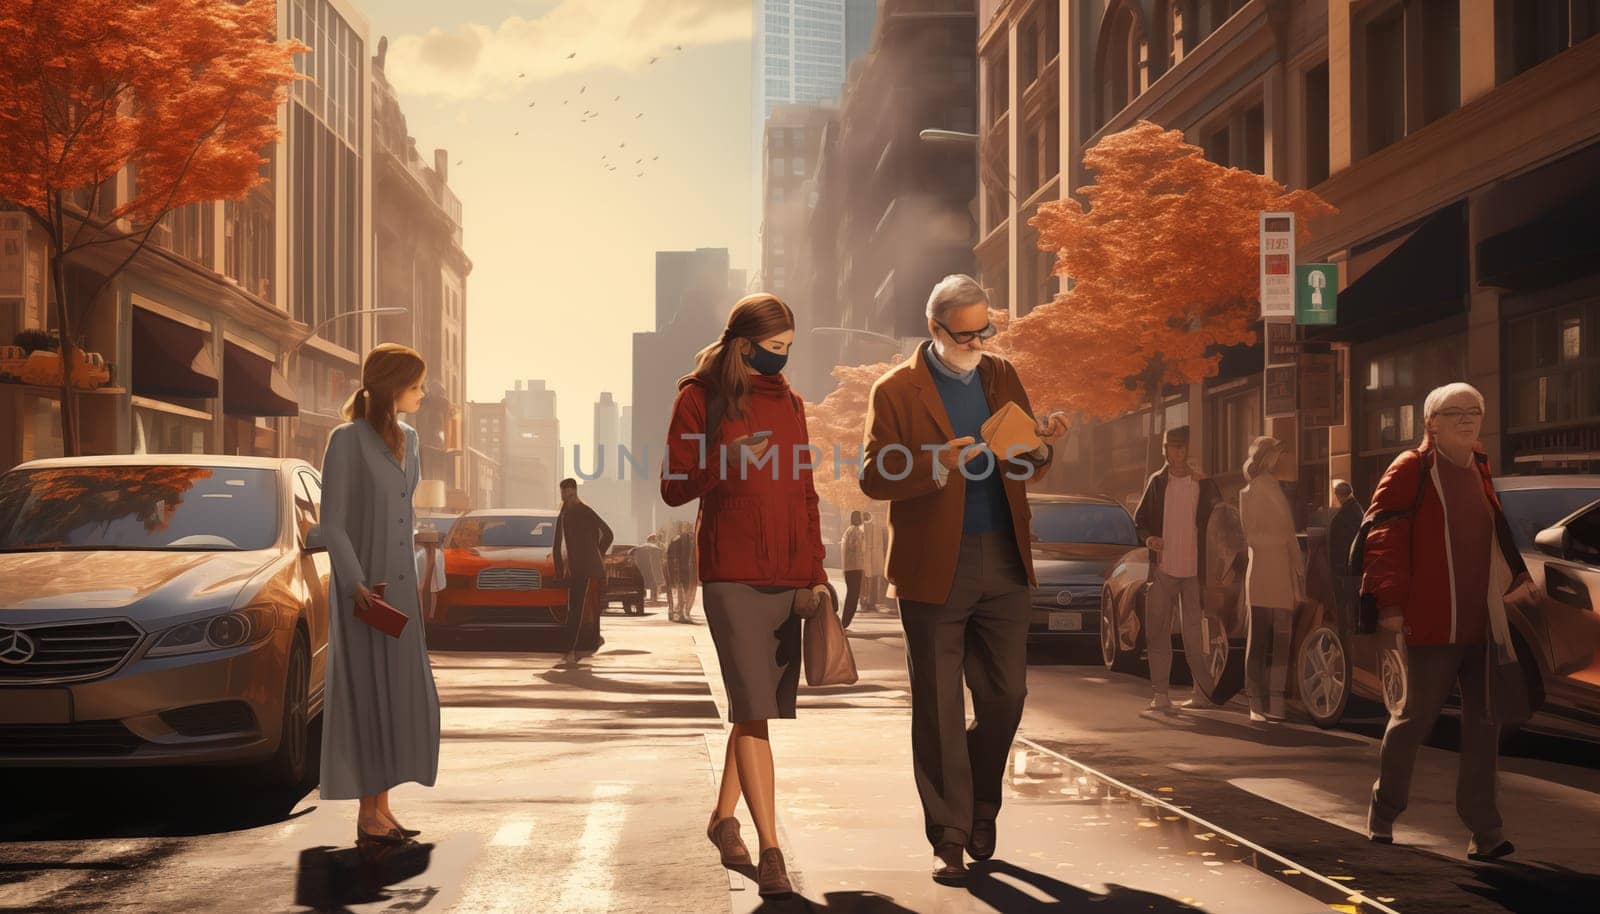 A diverse group of individuals walks animatedly through a bustling city street, guided by an AI assistant. They navigate around various obstacles, embracing the vibrant sights and sounds of the urban landscape.